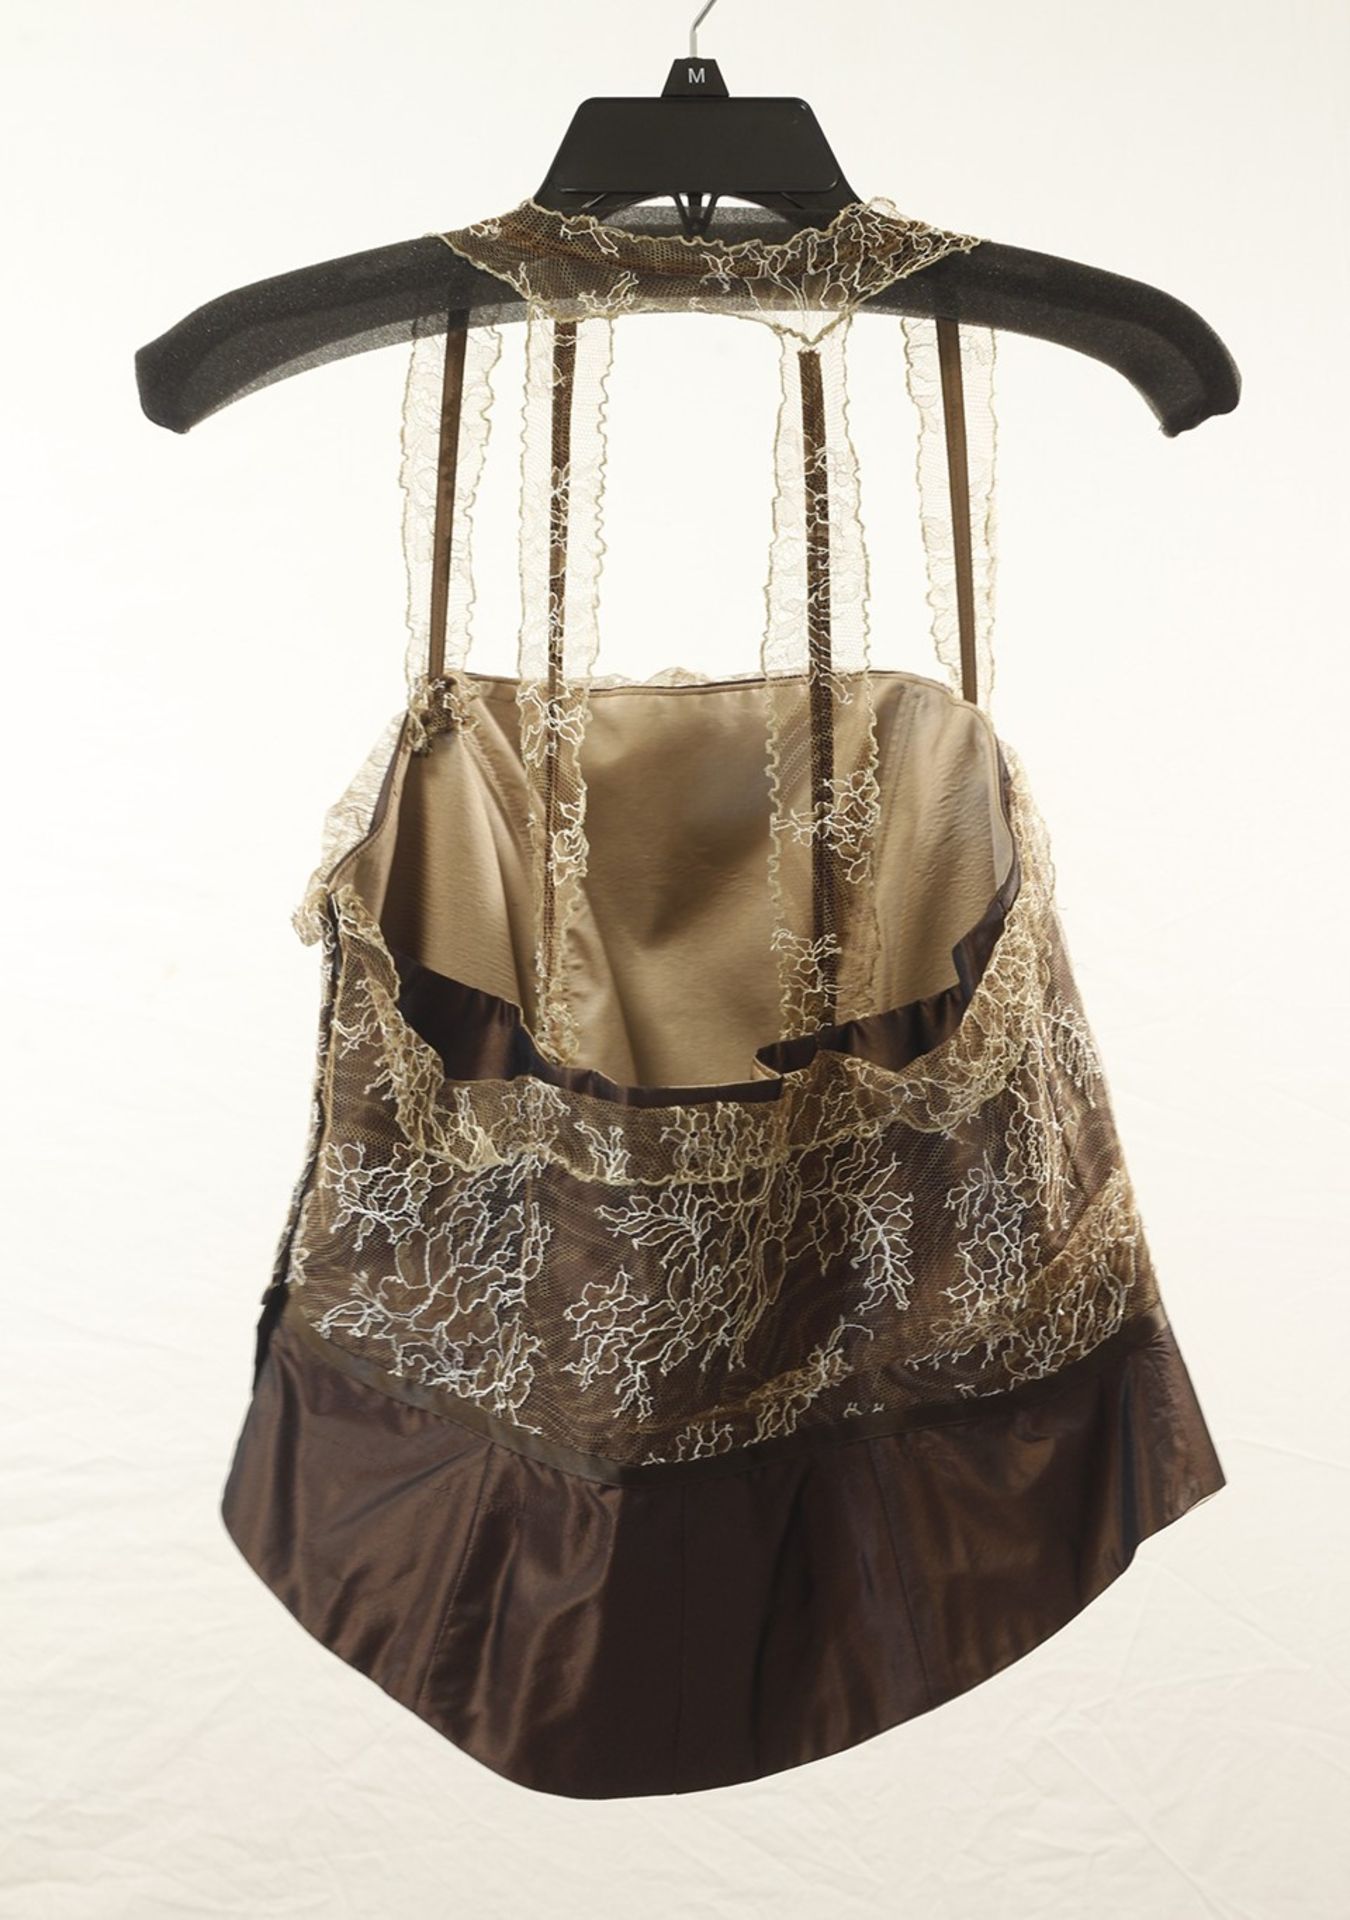 1 x Anne Belin Brown Halterneck - Size: 20 - Material: 100% Silk - From a High End Clothing Boutique - Image 6 of 6